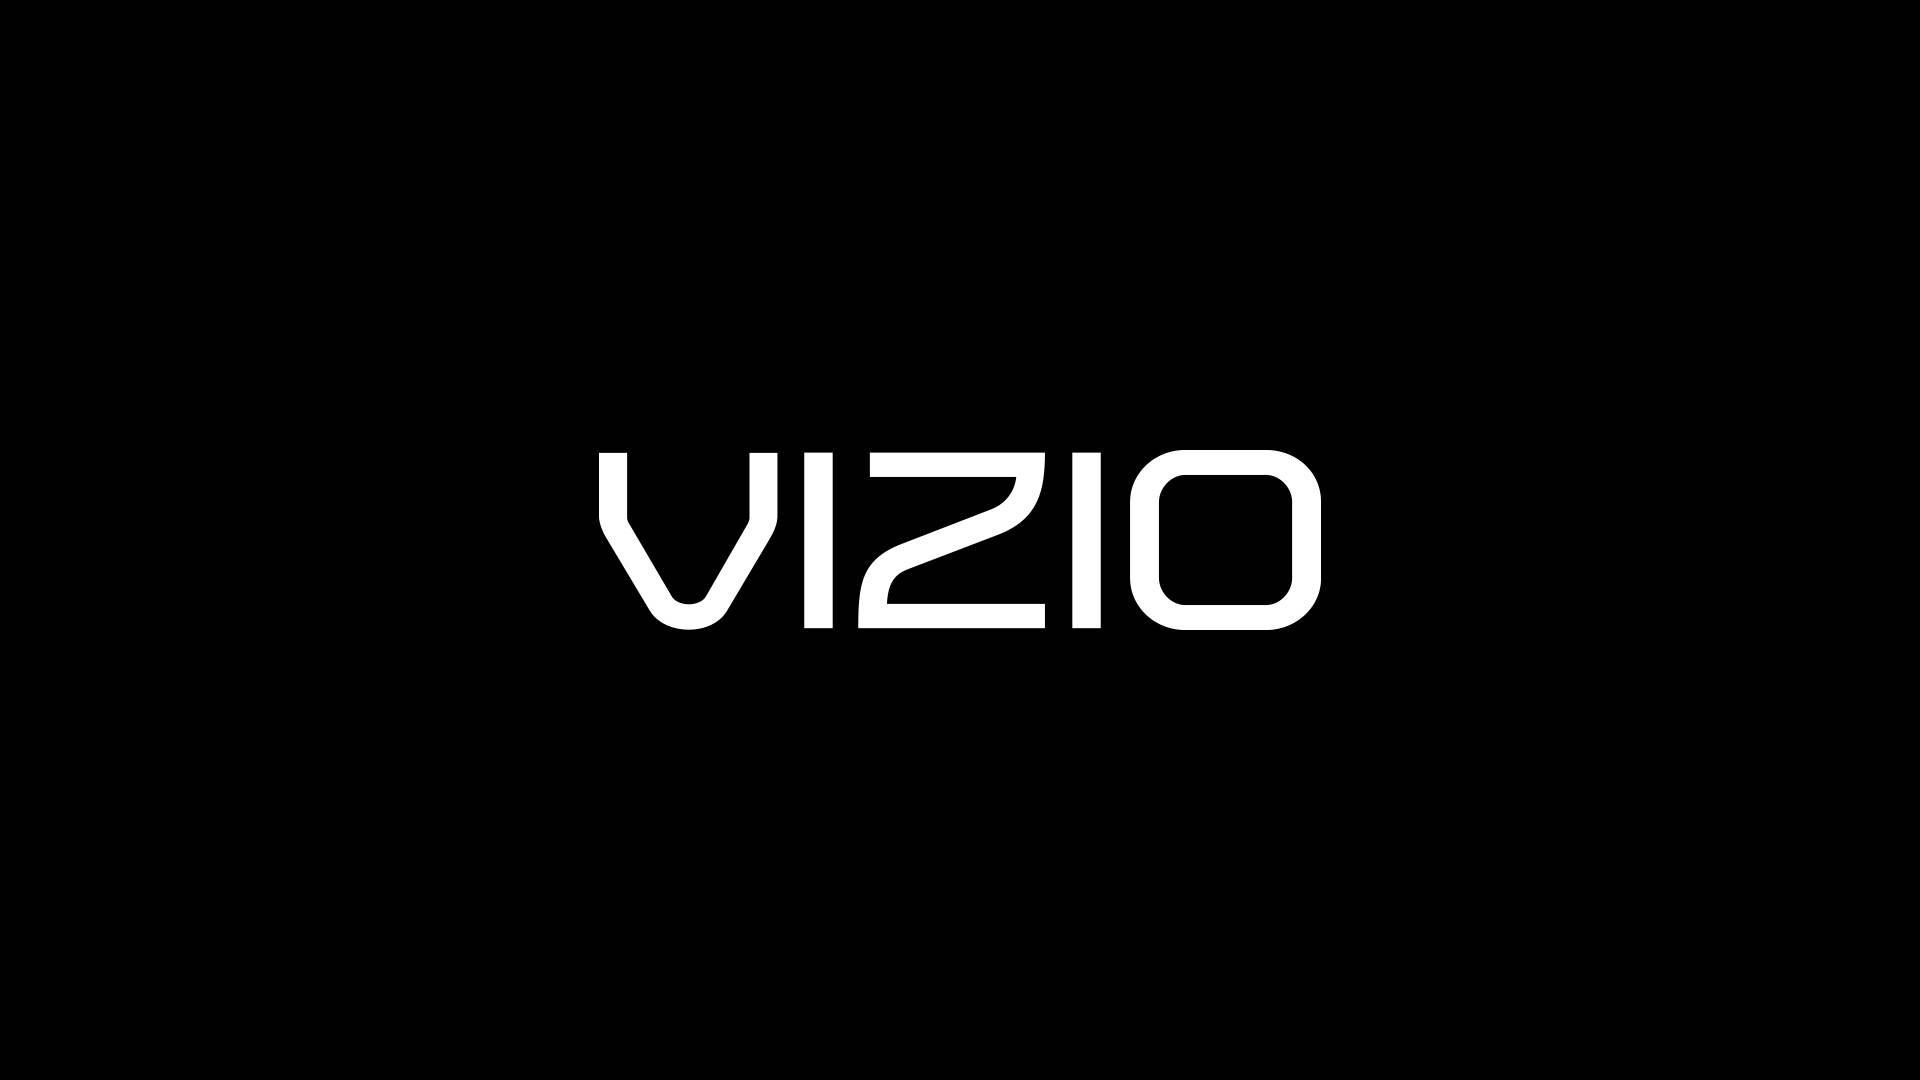 vizio xled tv ivisible background png